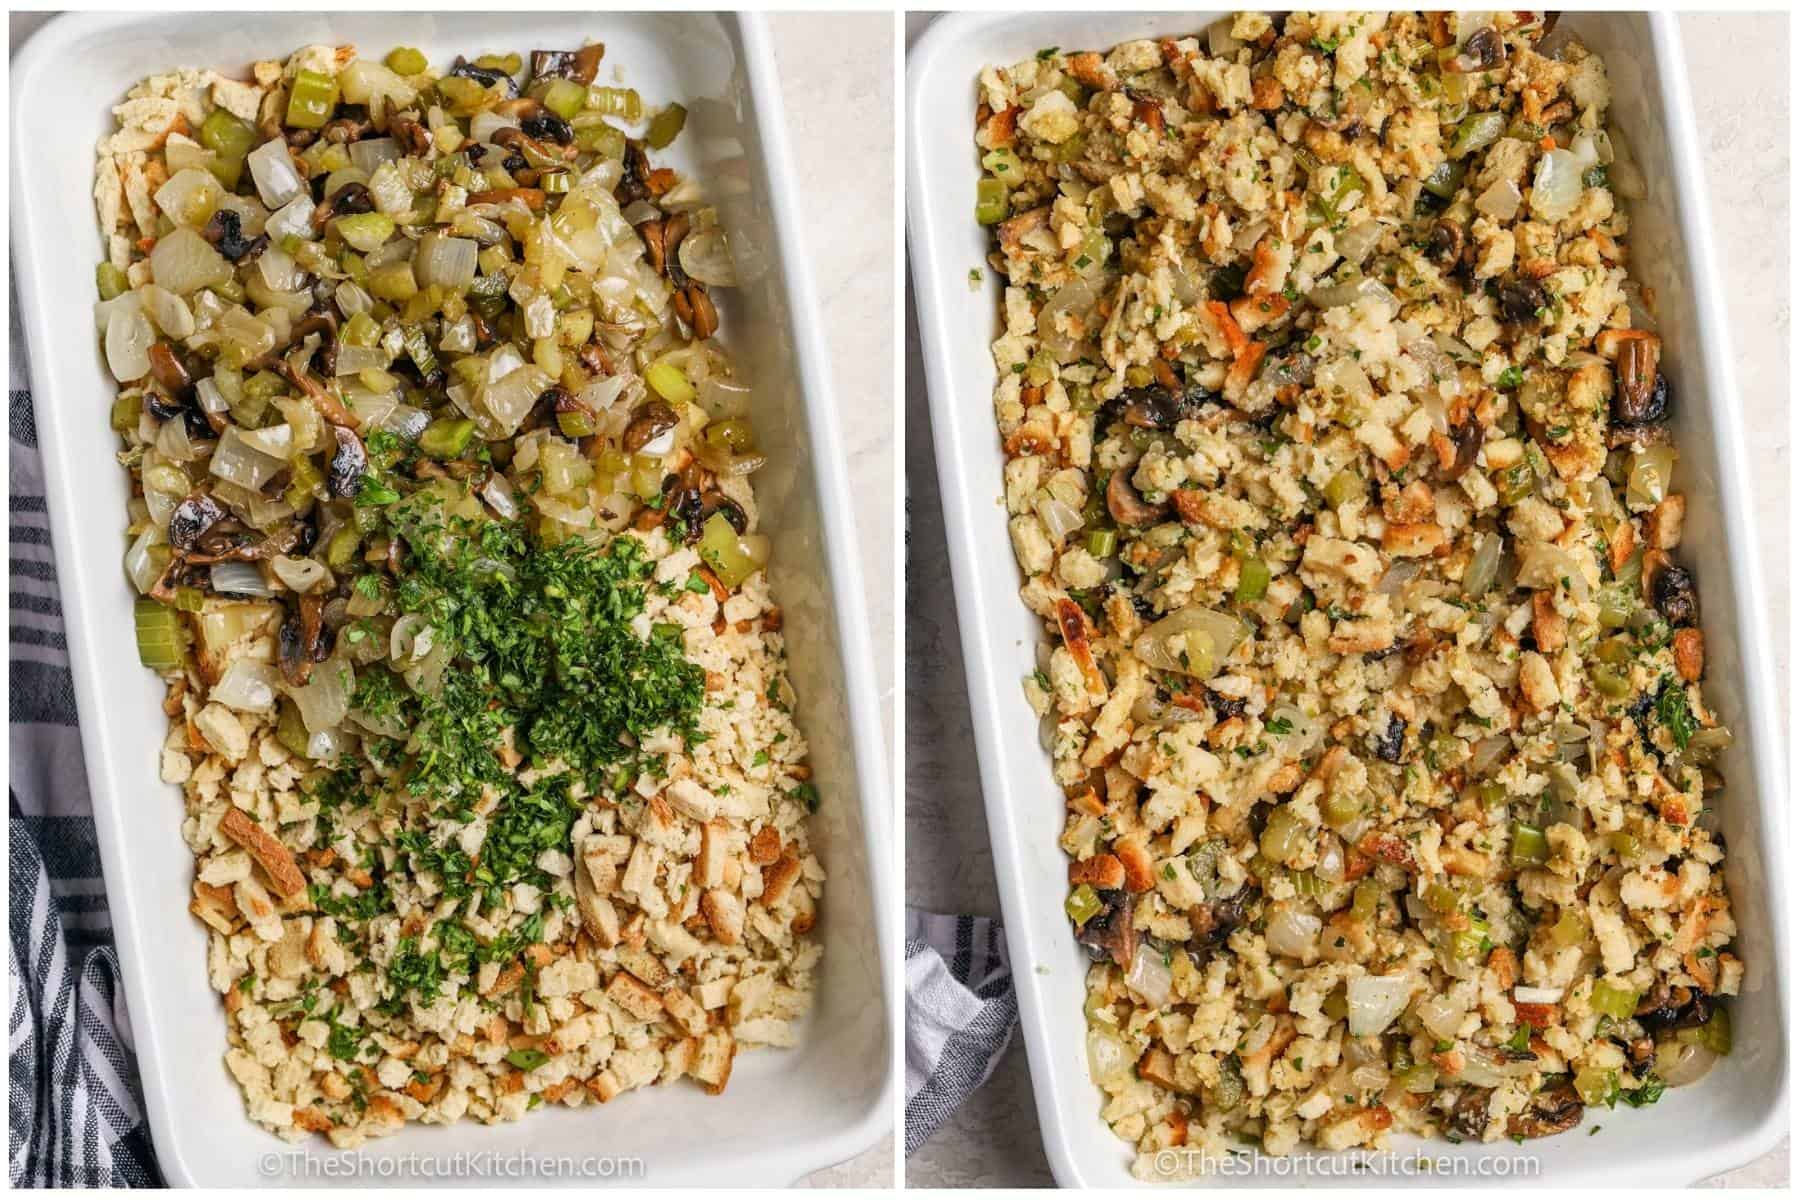 process of mixing ingredients together to make Shortcut Stuffing from a Box